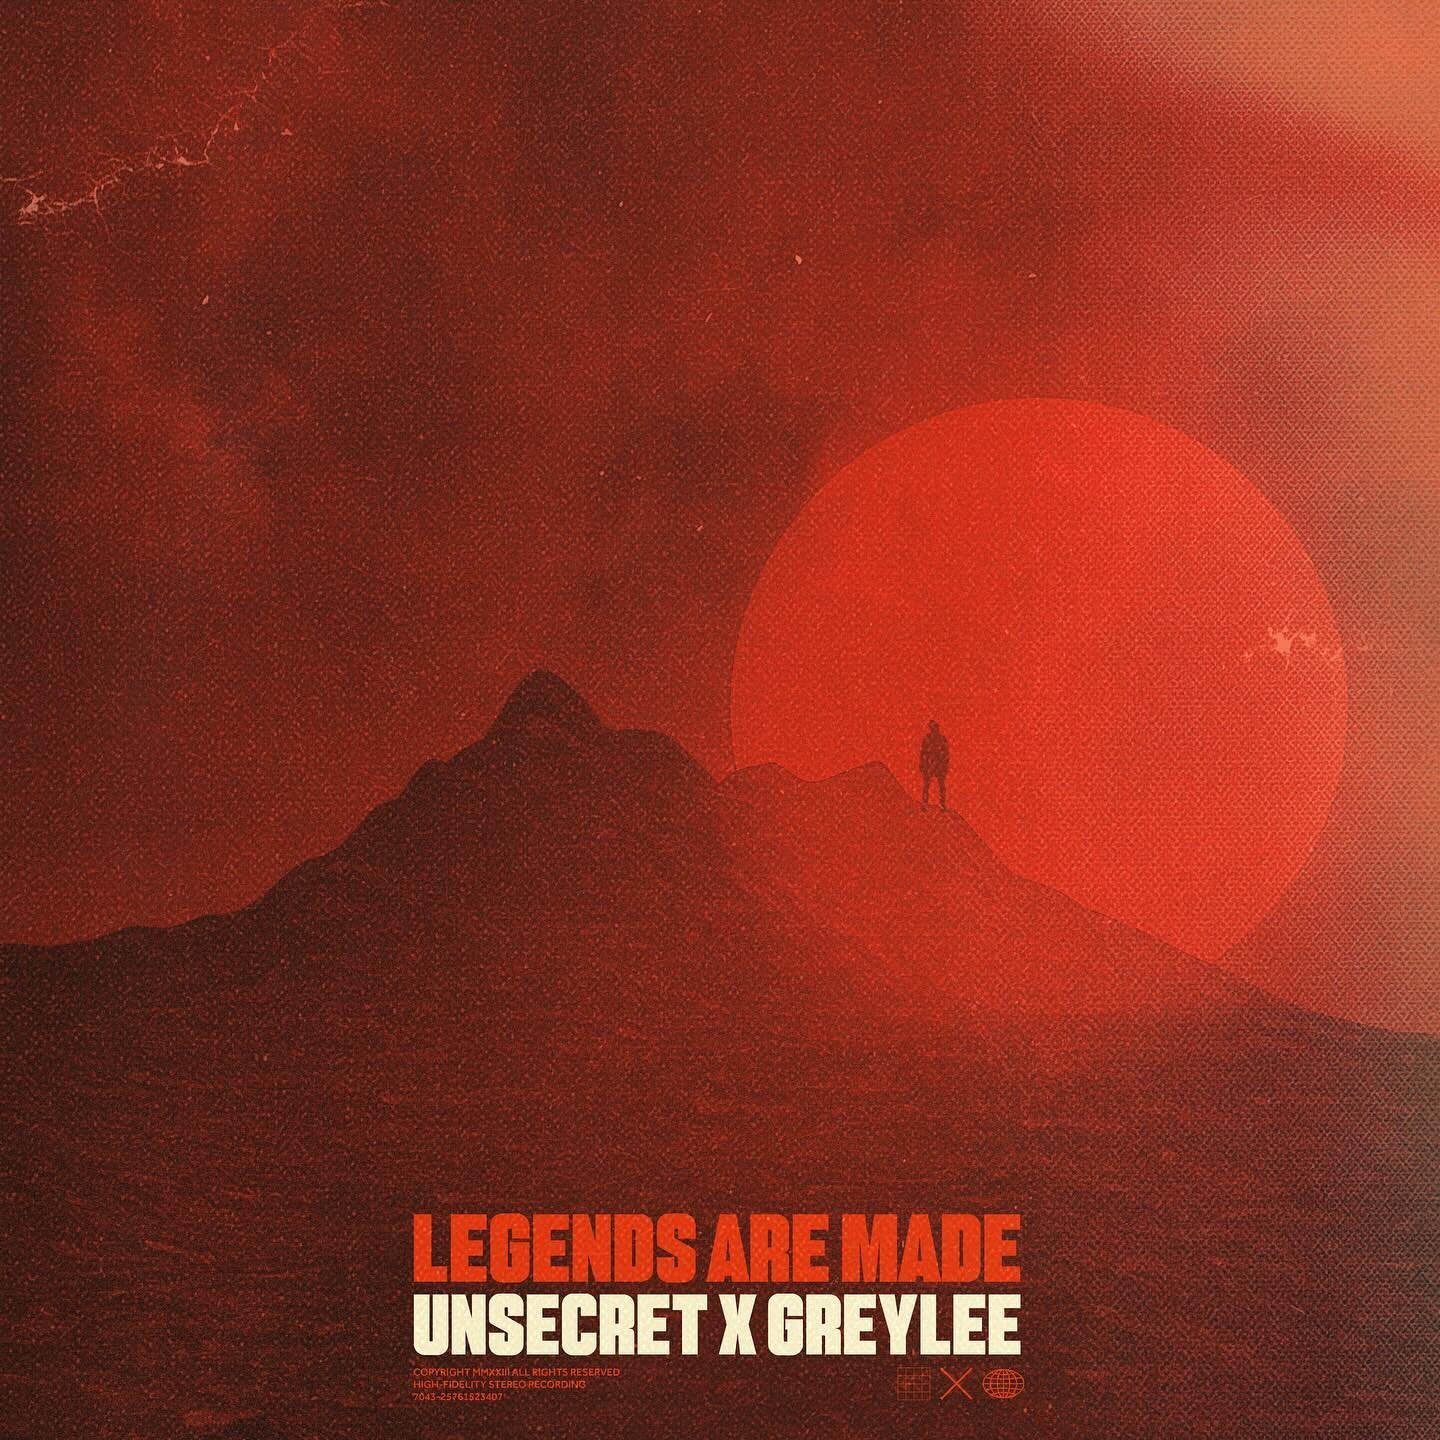 One of our favs from 2023 - &ldquo;Legends Are Made&rdquo; by @whoisunsecret x @greyleeofficial